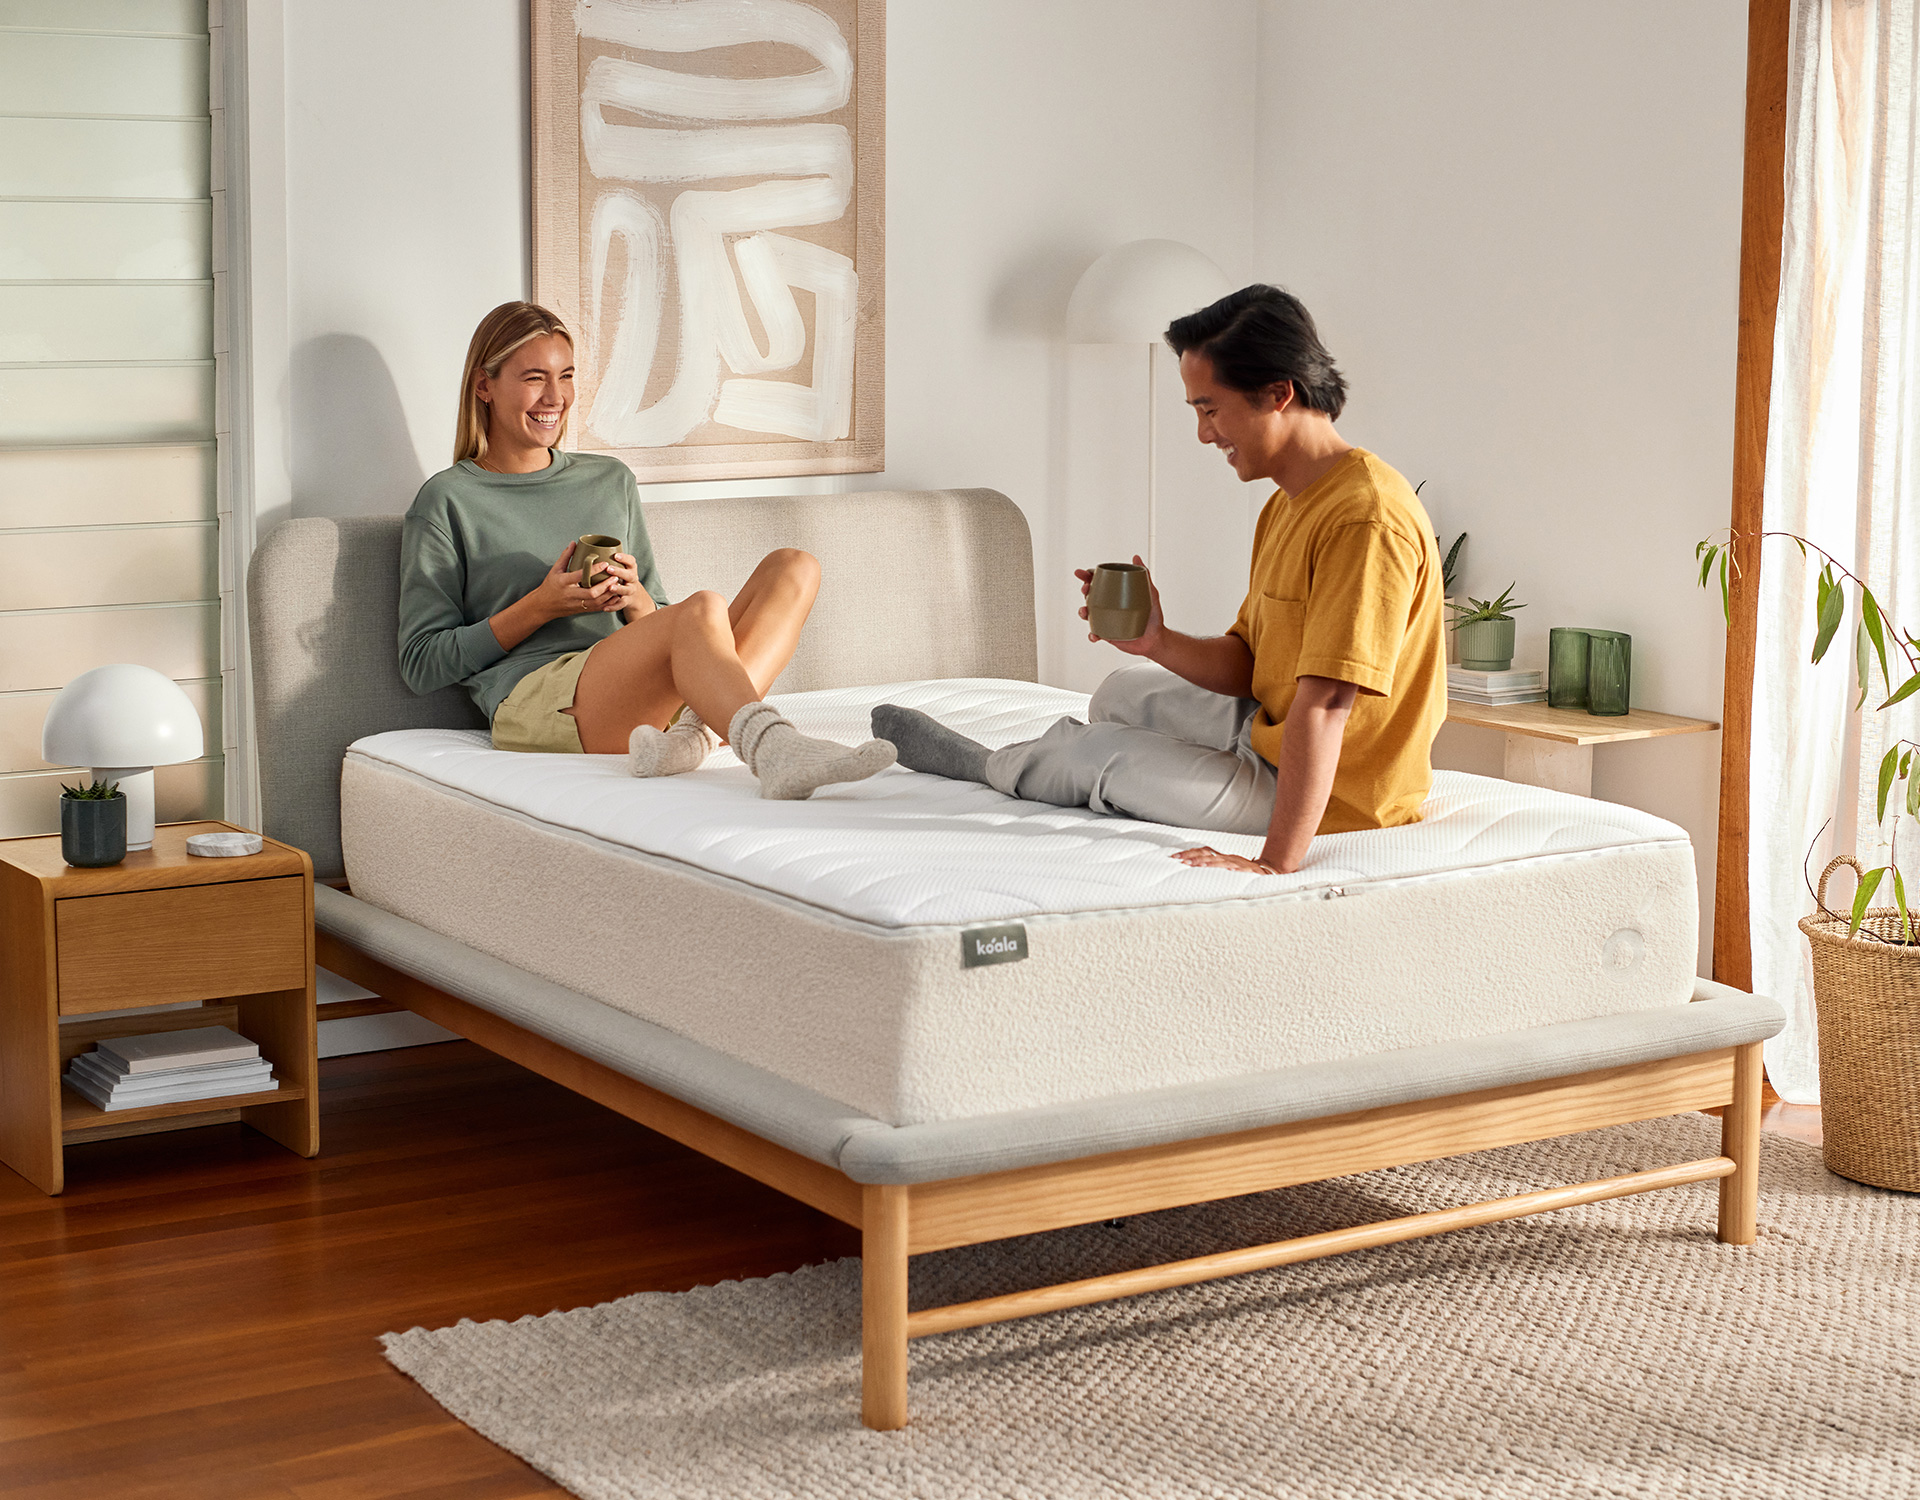 Smiling couple on a springless Koala mattress discovering that foam mattresses are just as good as pocket spring mattresses